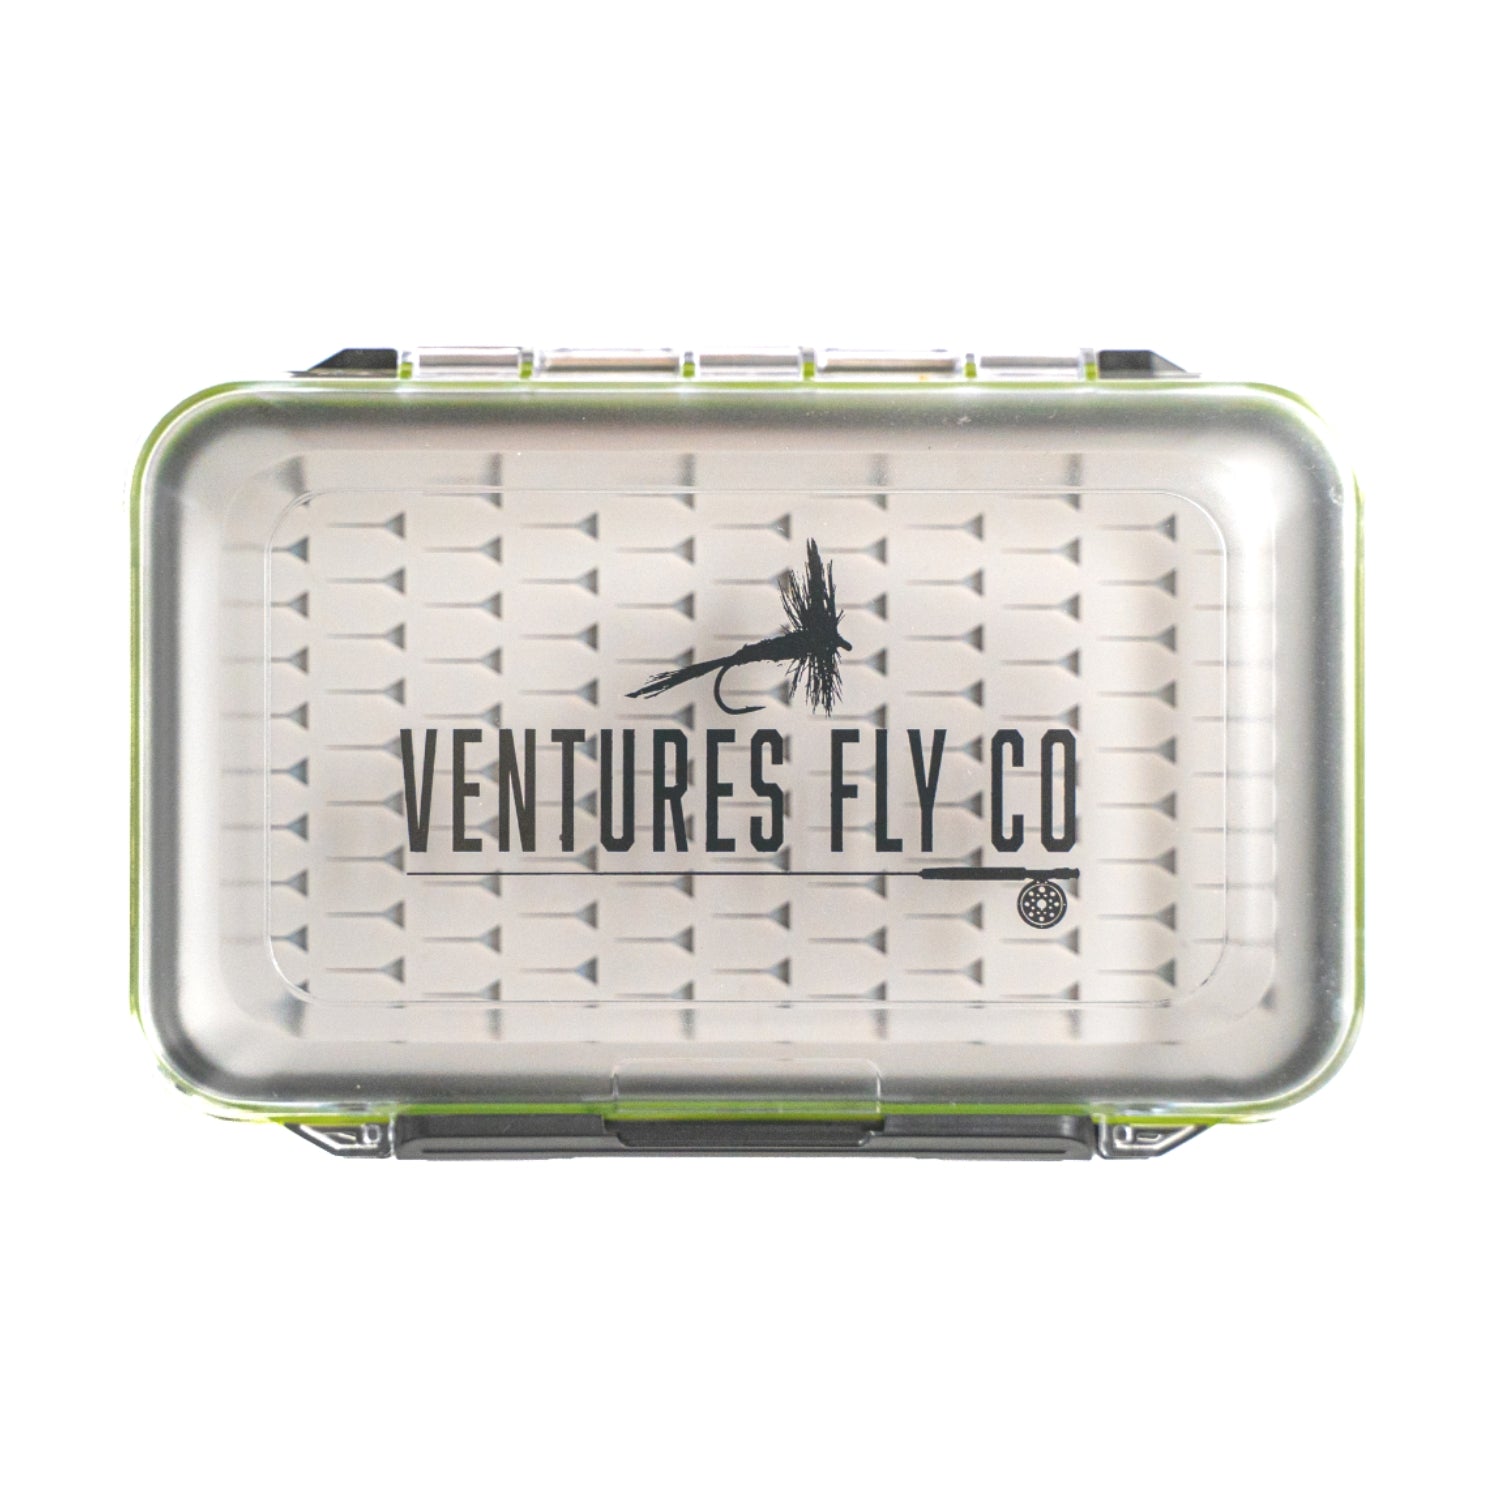 Waterproof Fly Box – Ventures Fly Co